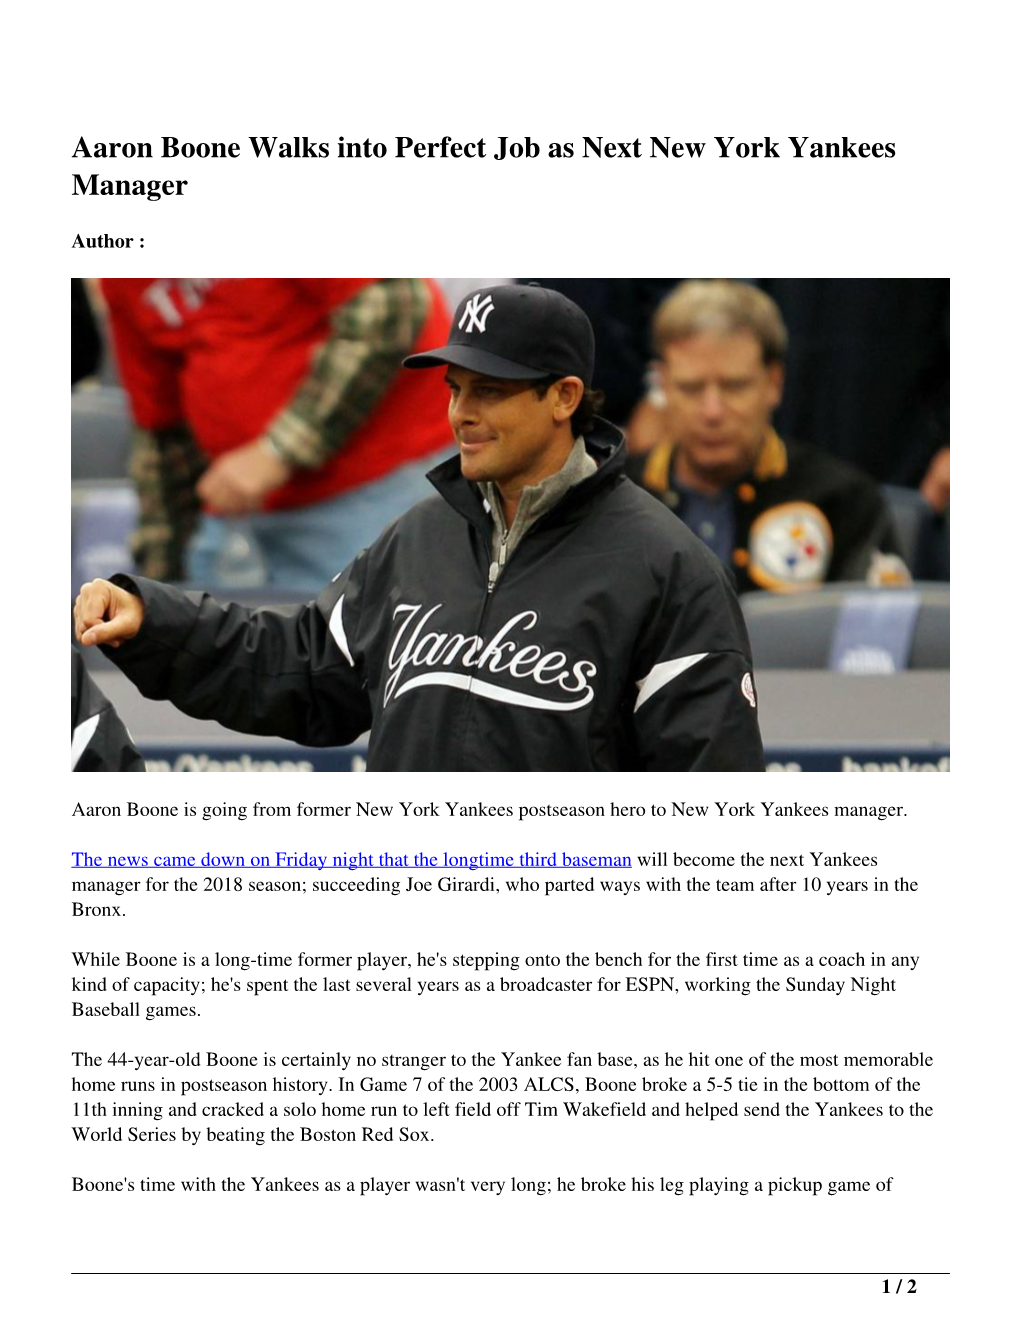 Aaron Boone Walks Into Perfect Job As Next New York Yankees Manager